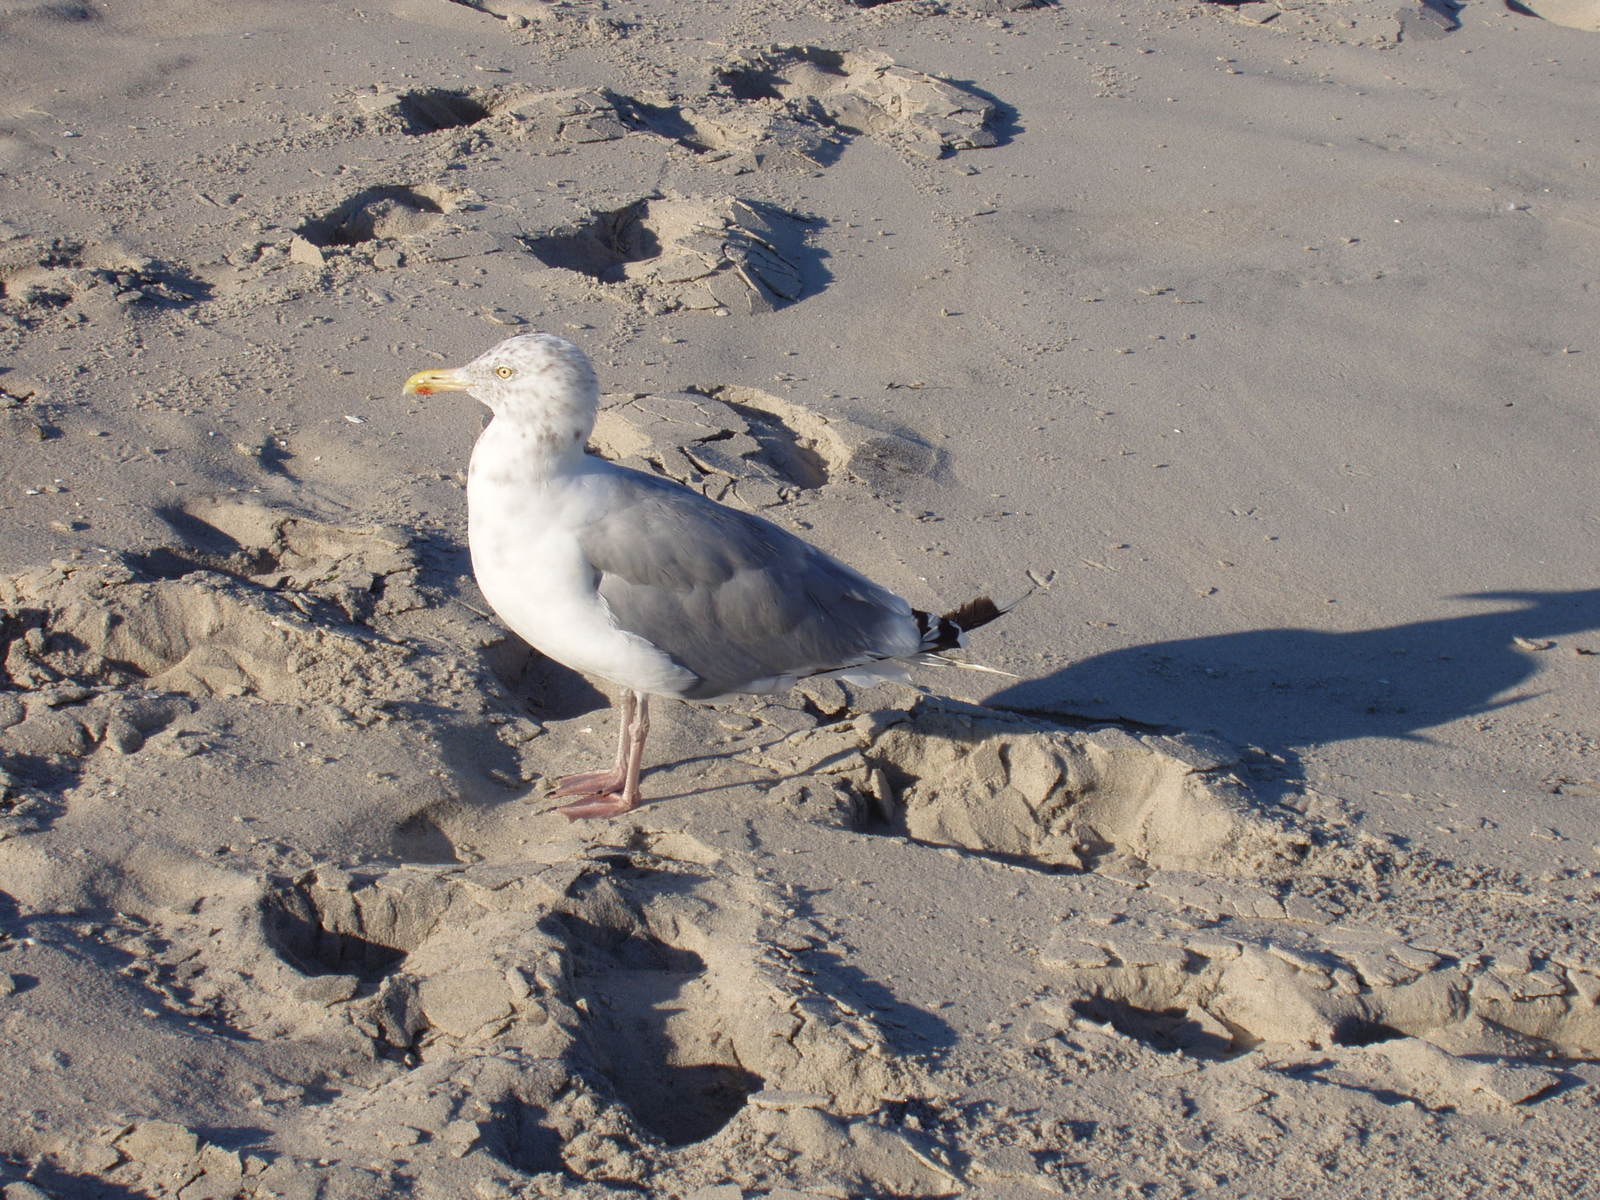 a bird standing on the beach and looking down